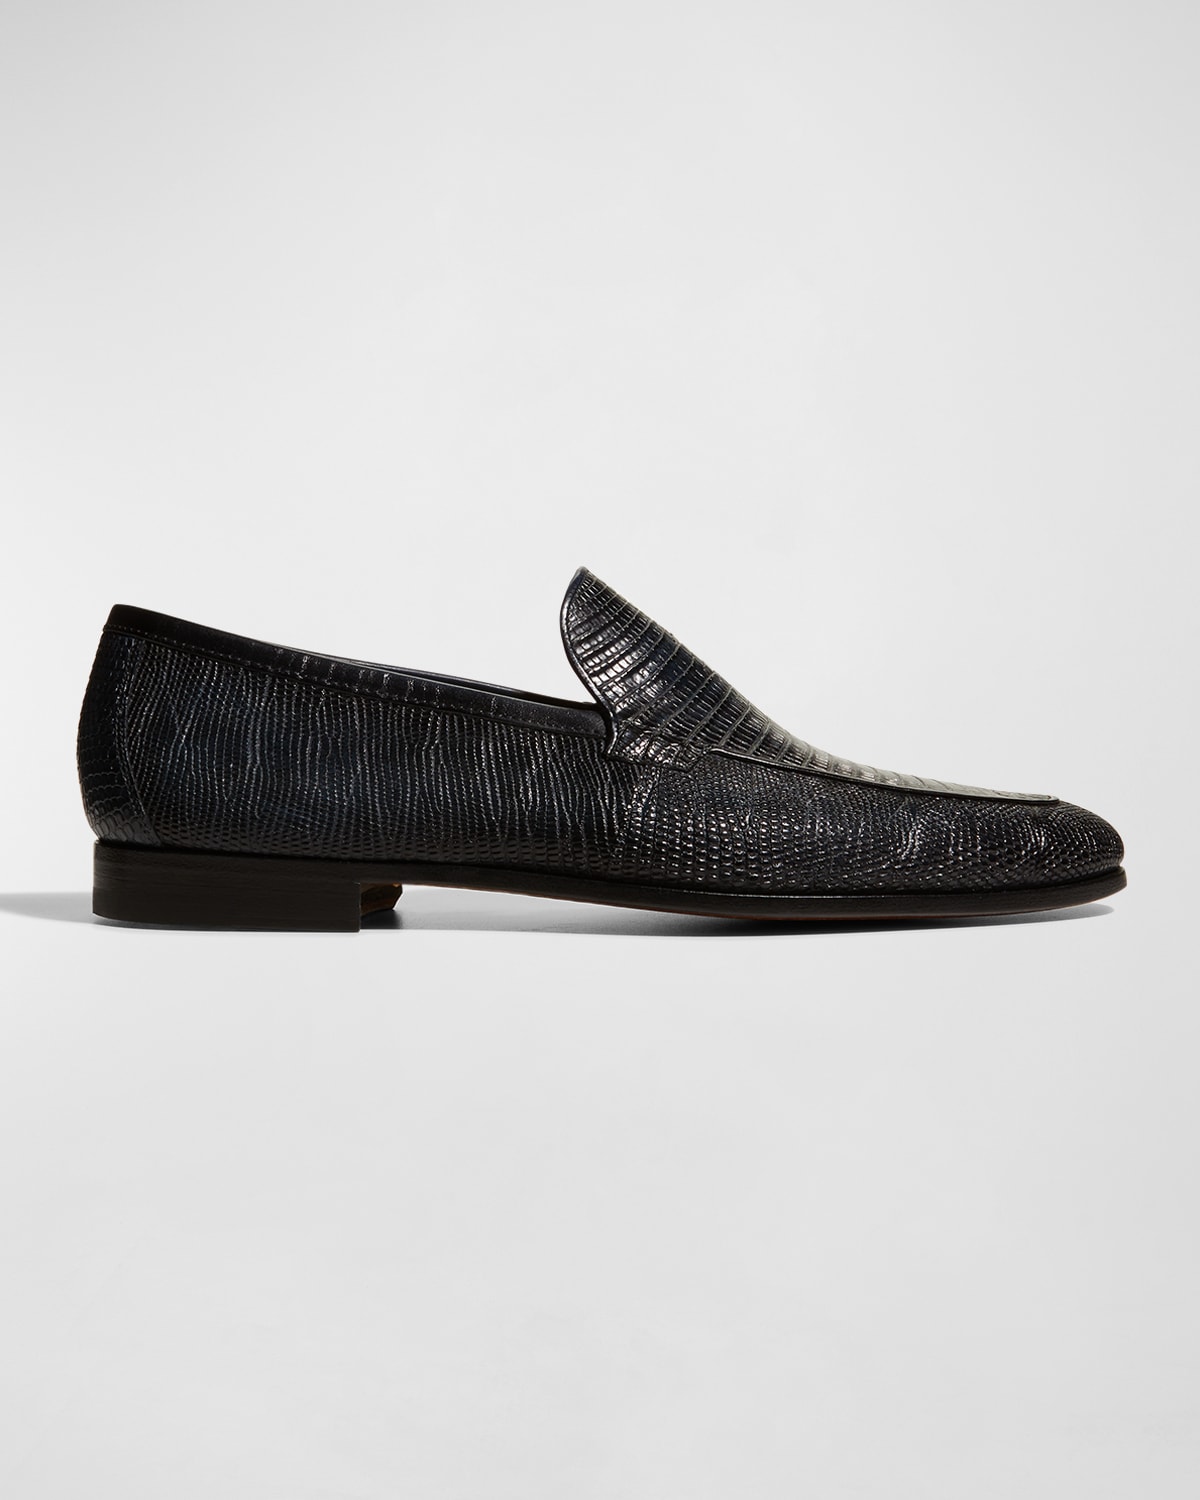 Magnanni Men's Matlin III Leather Penny Loafers | Neiman Marcus